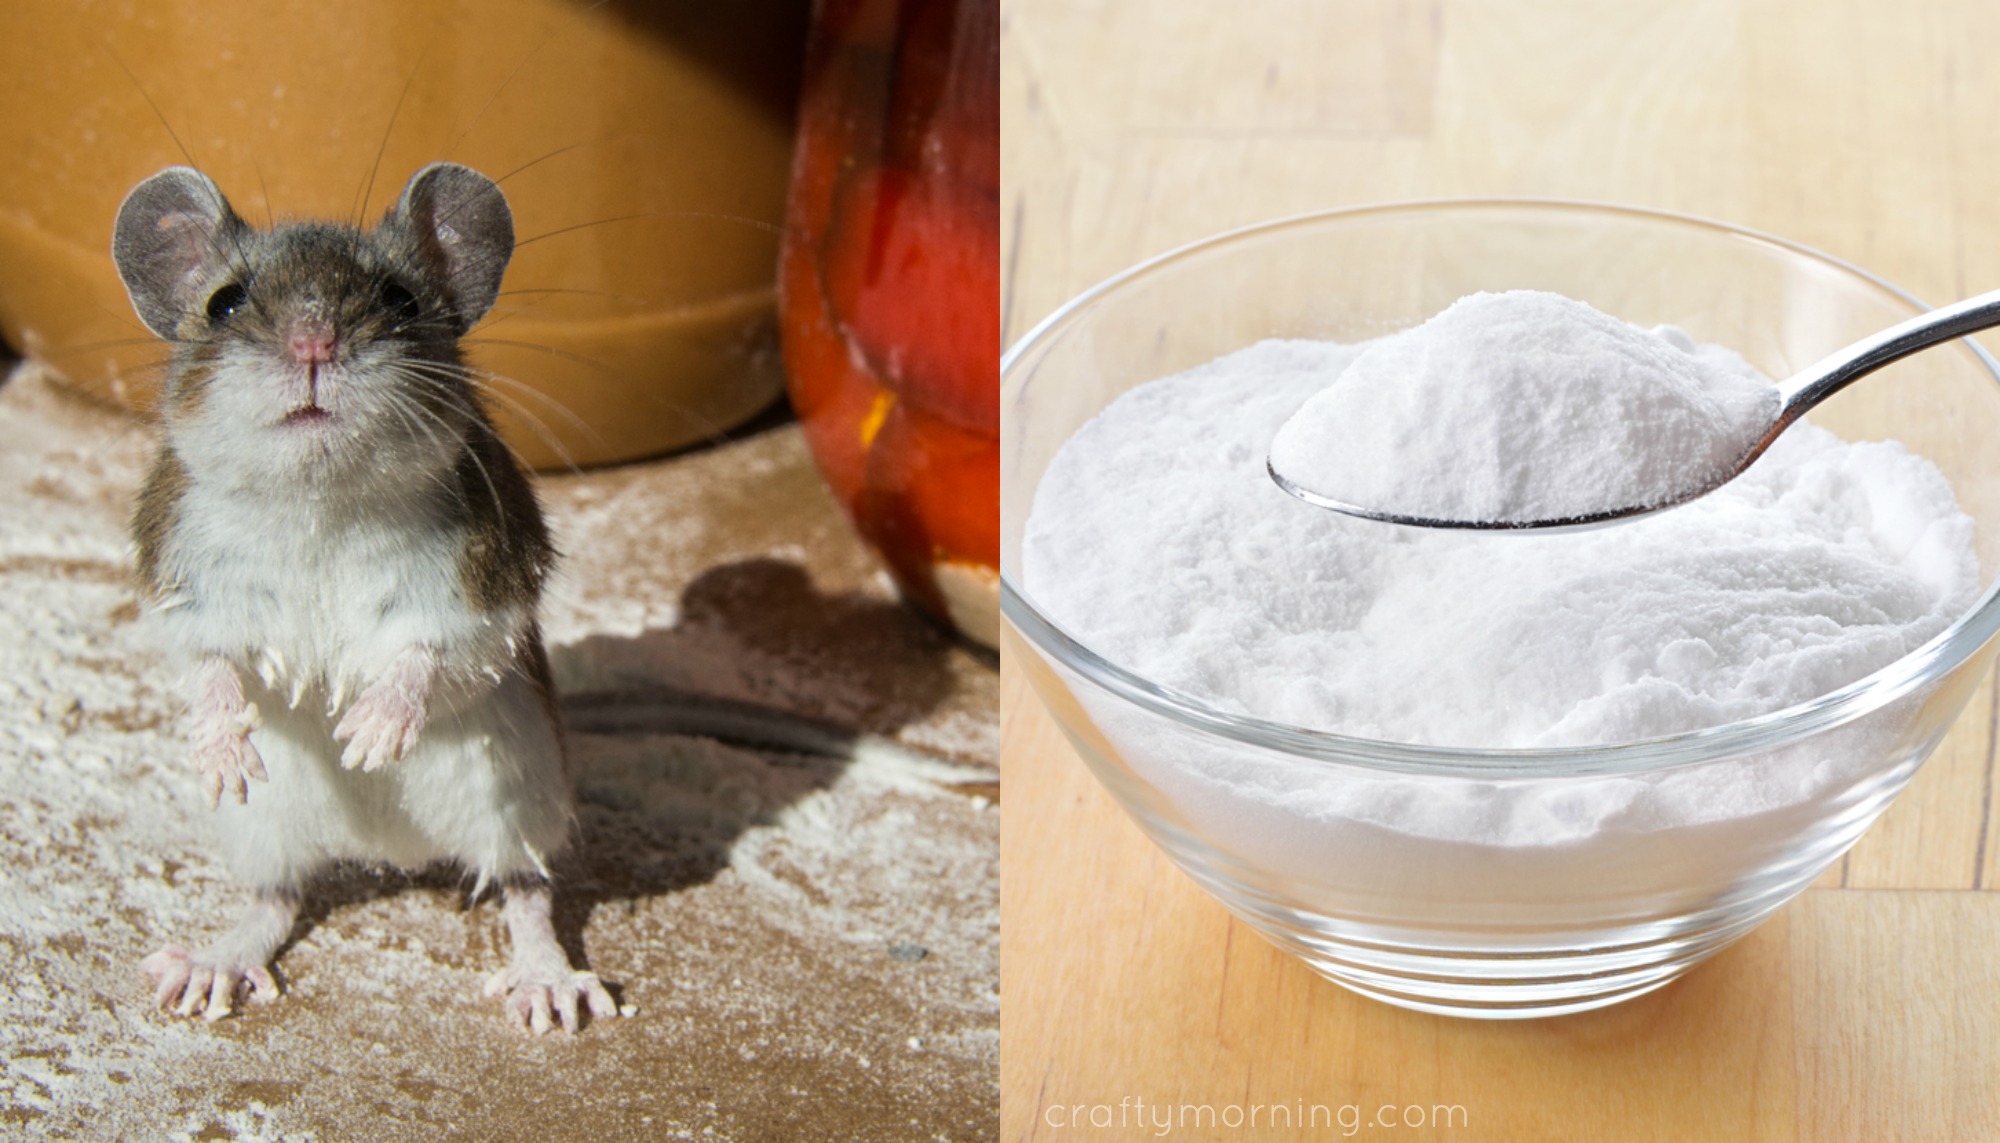 12 Clever Ways To Drive Mice And Rats Out Of Your Home Crafty Morning,Napoleon Pastry Recipe